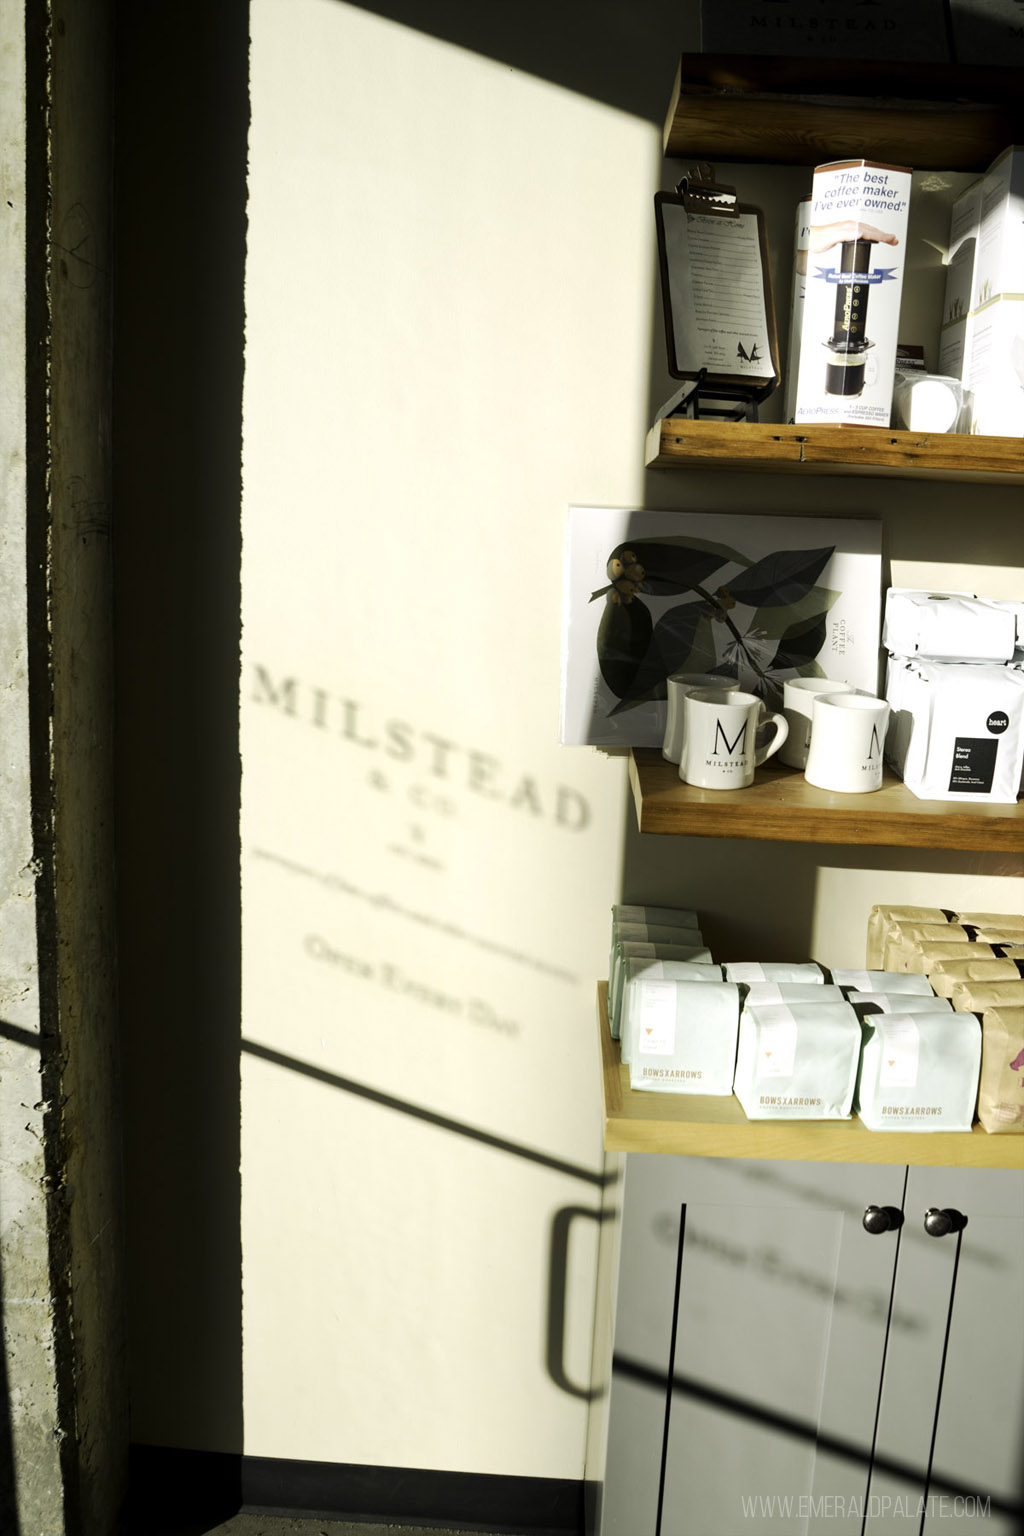 Milstead Coffee Co logo reflecting in the sunlight